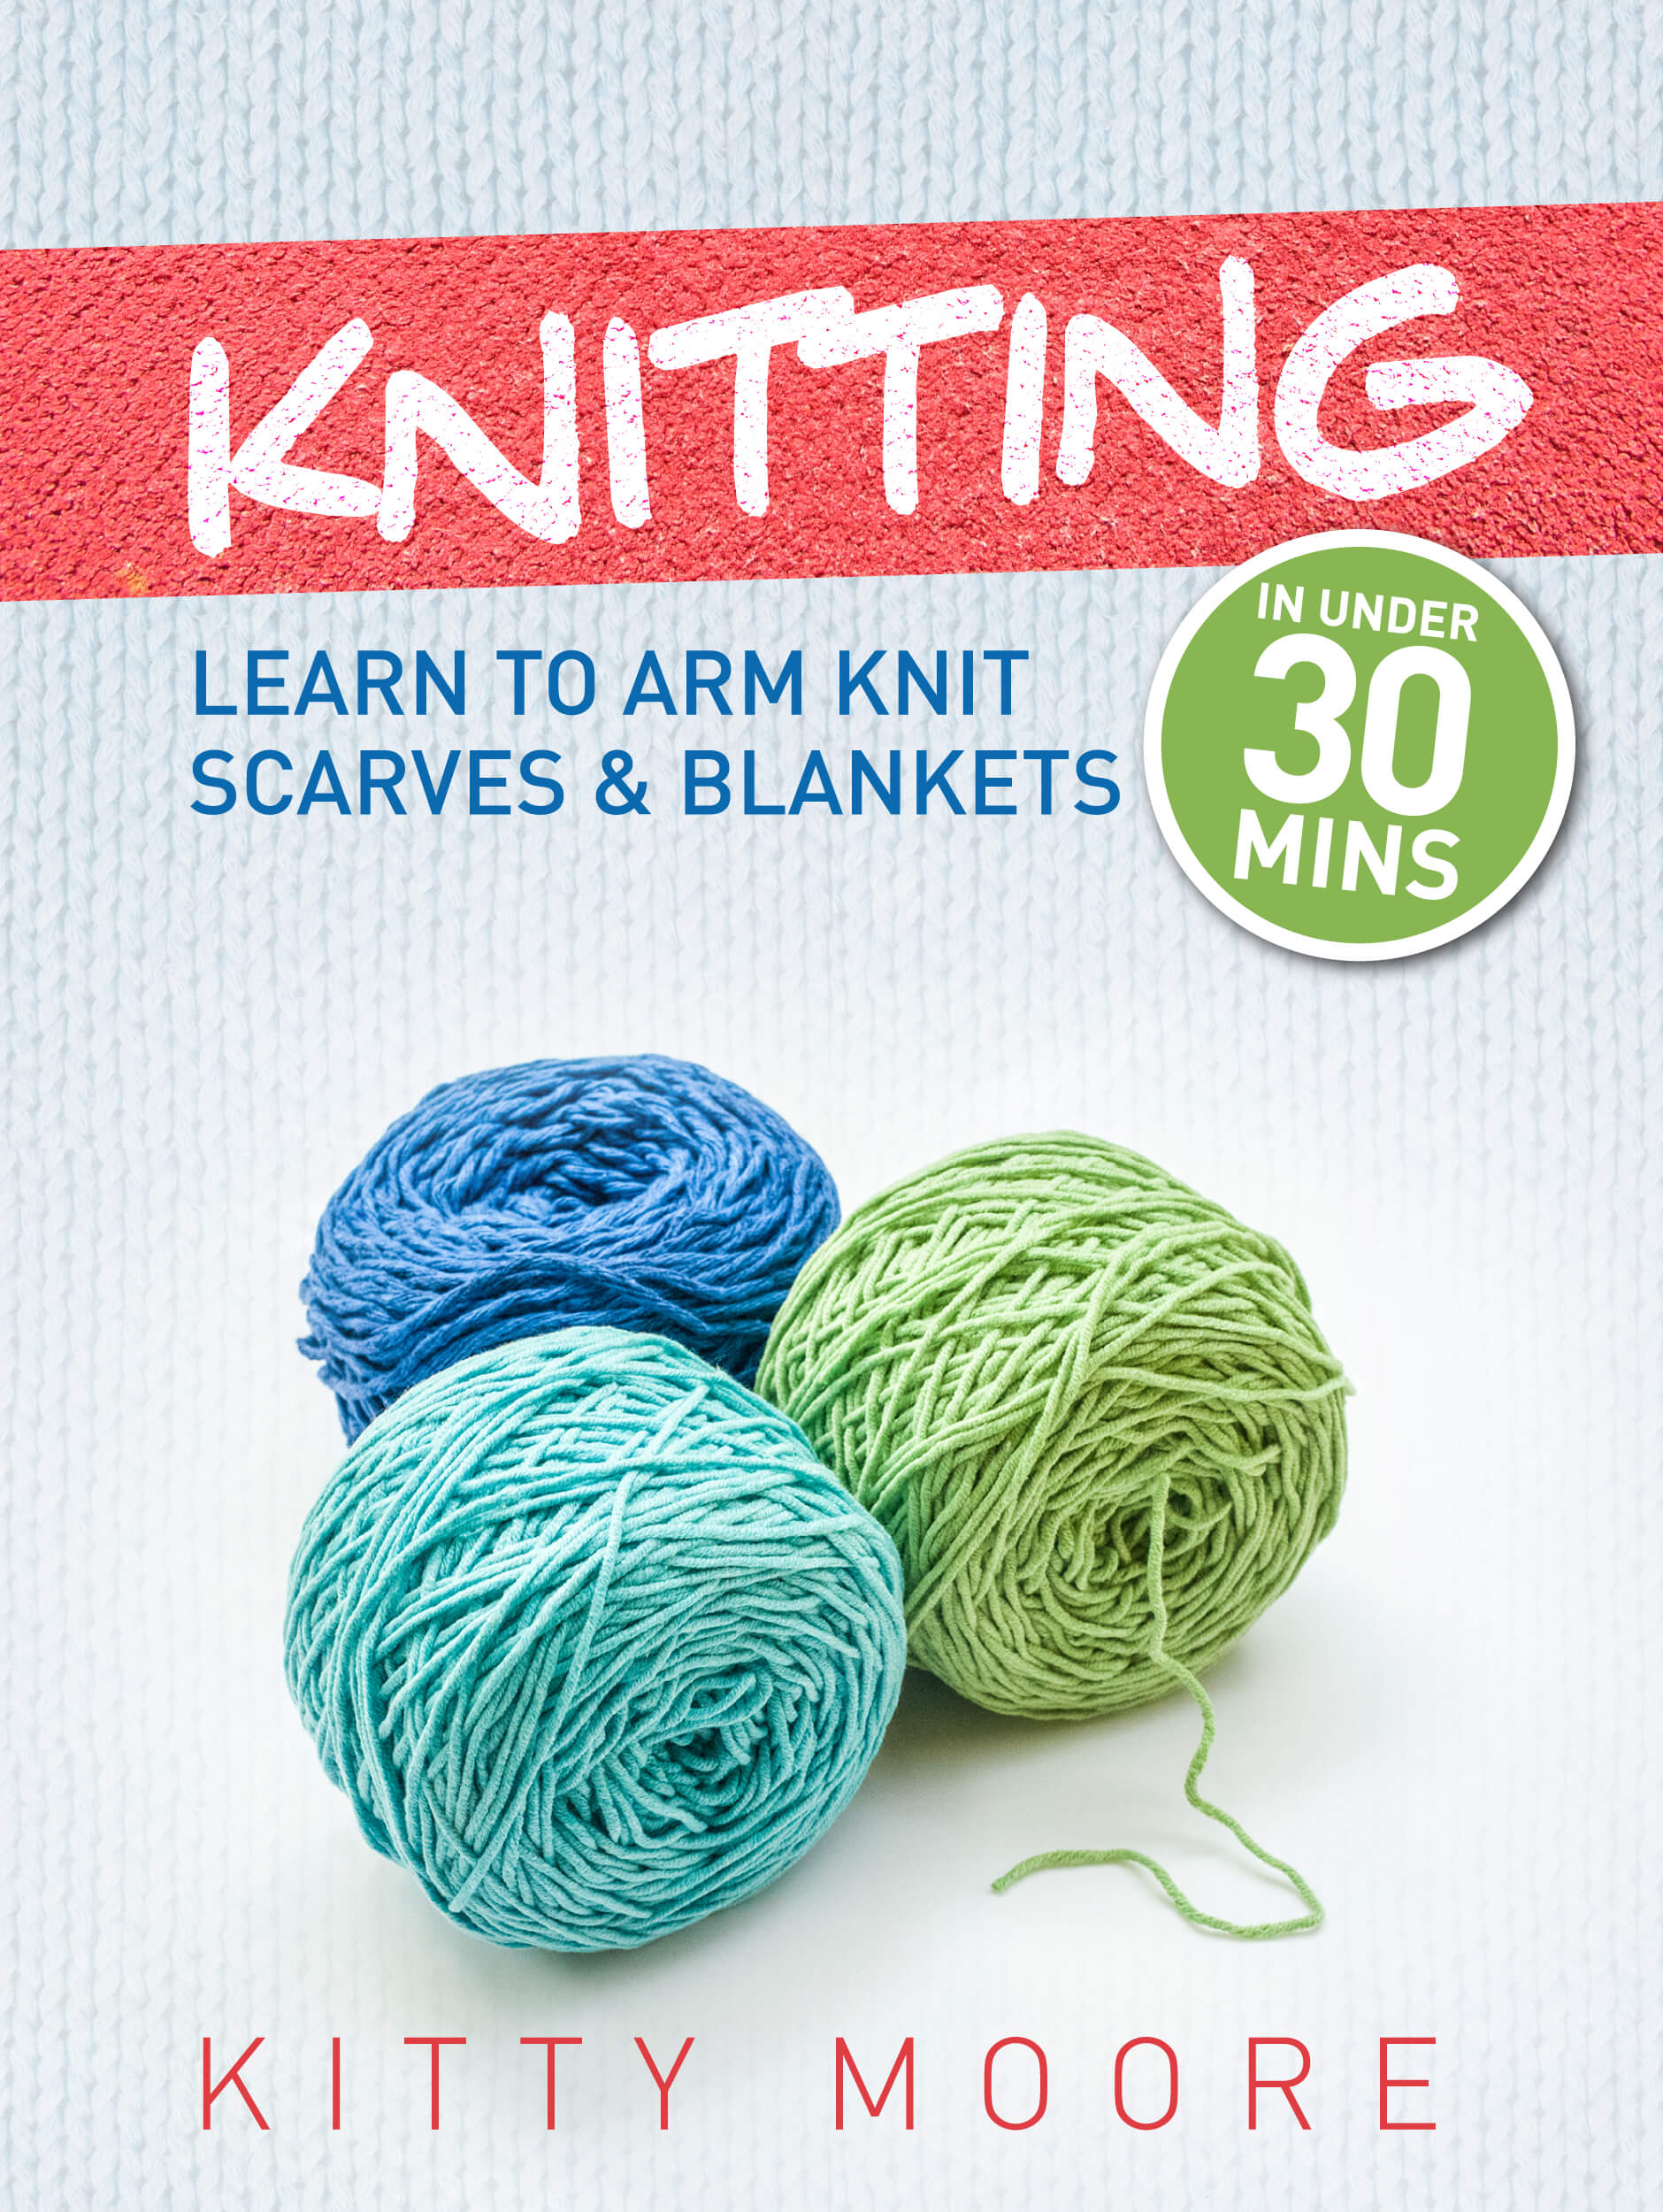 FREE: Knitting (4th Edition): Learn To Arm Knit Scarves & Blankets In Under 30 Minutes! by Kitty Moore